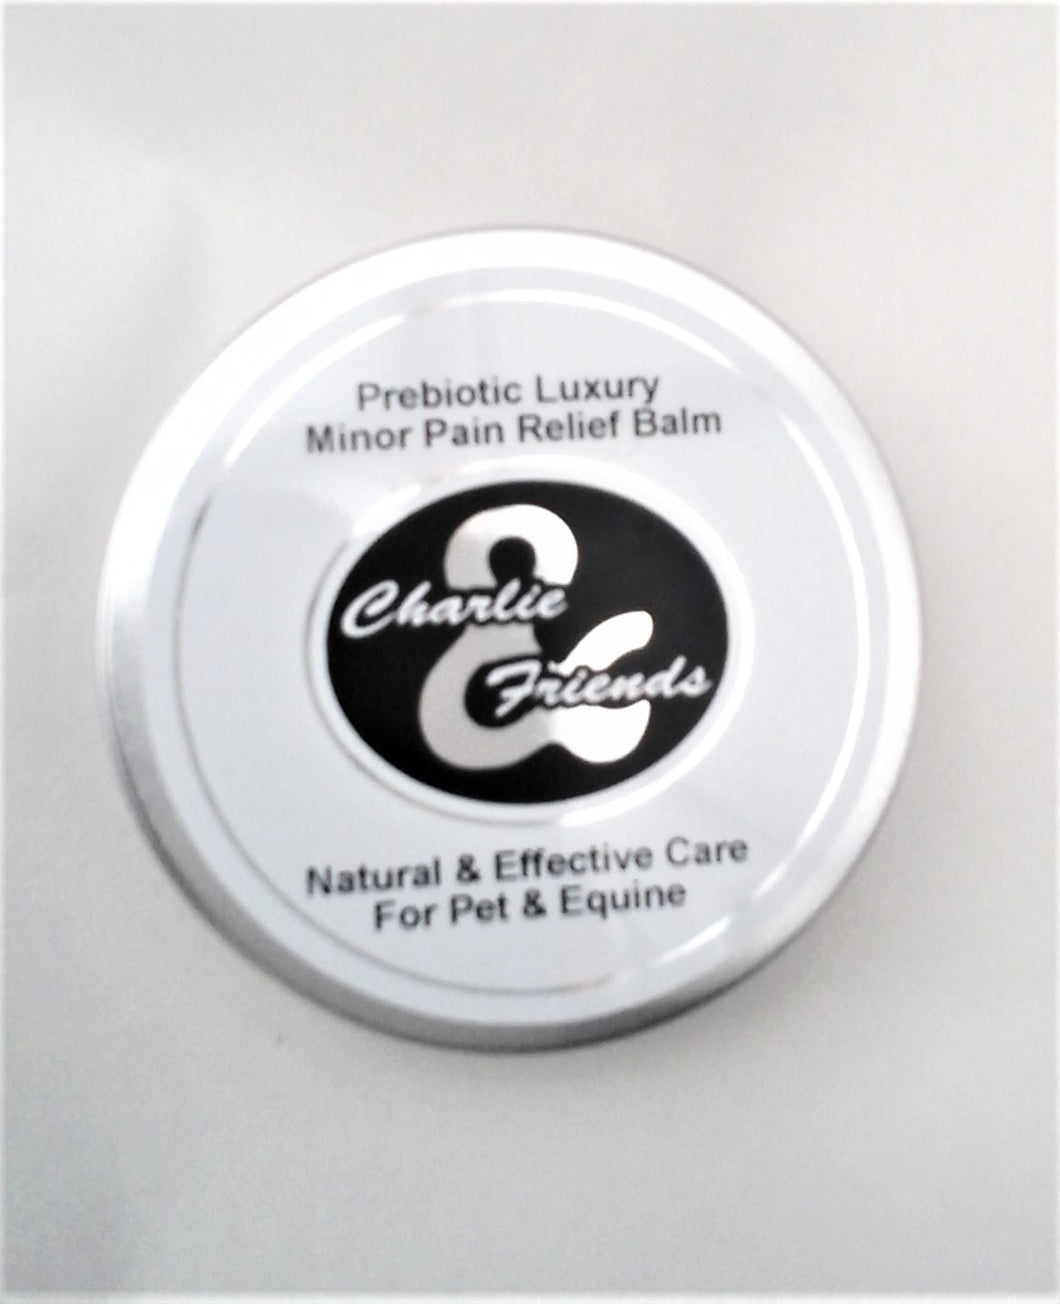 Prebiotic Luxury Pet Minor Pain Relief Balm      100ml     Charlie And Friends Products